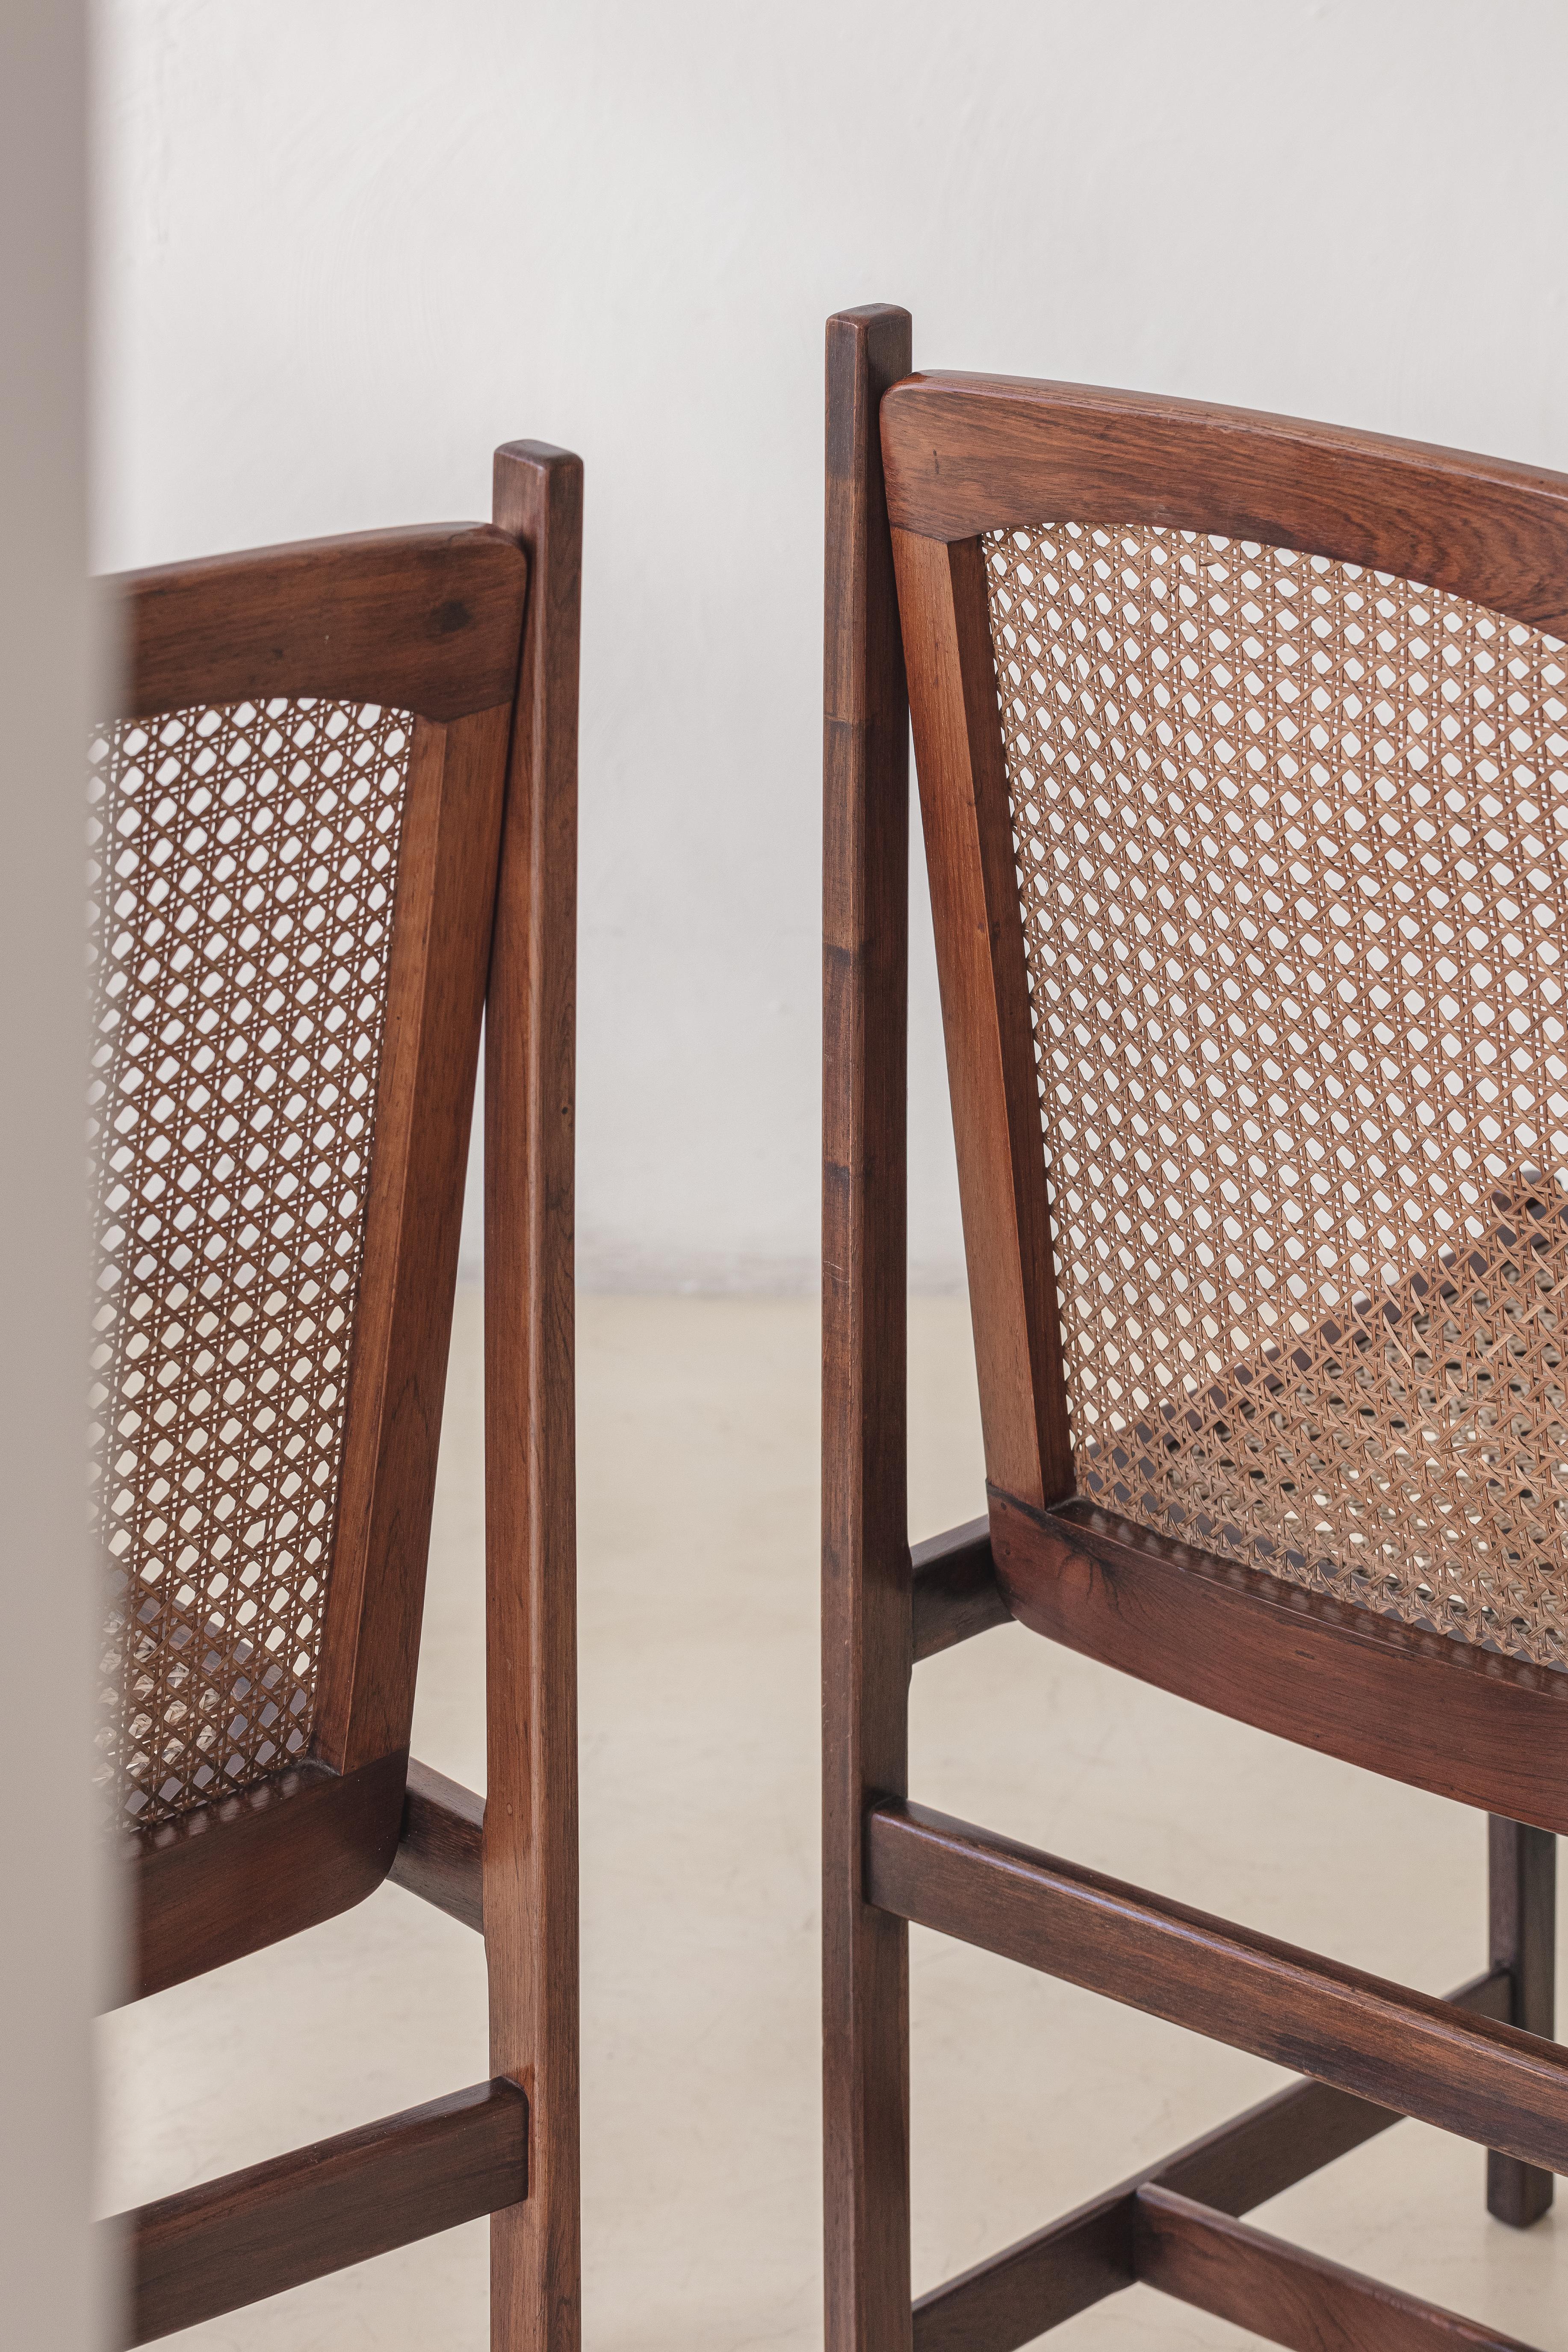 Celina Decorações Set of Six Dining Chairs, Rosewood and Cane, Midcentury 1960s For Sale 5